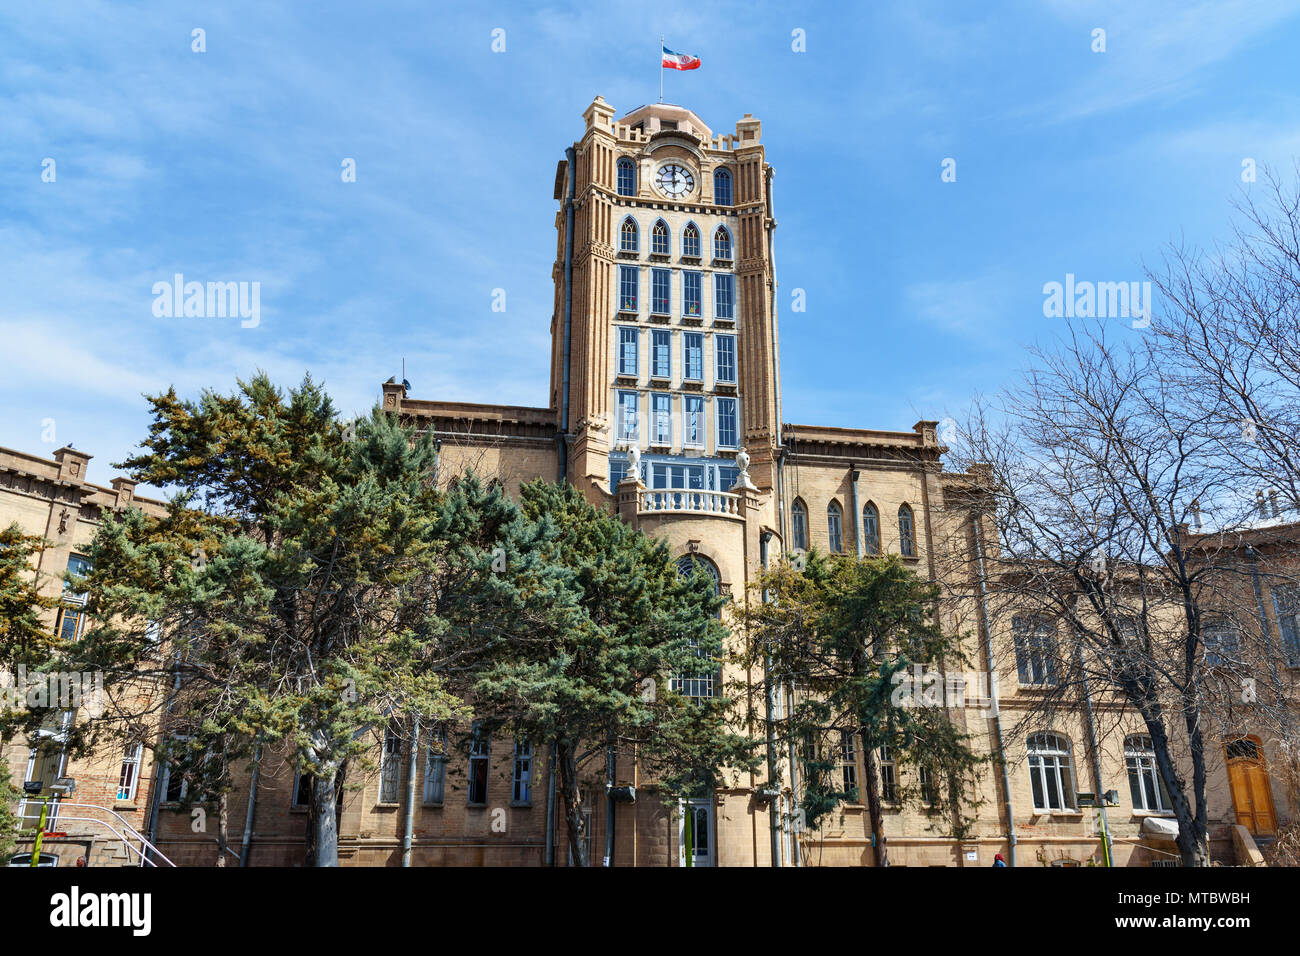 Tabriz, East Azerbaijan province, Iran - March 15, 2018: Saat Tower also known as Tabriz Municipality Palace in Stock Photo